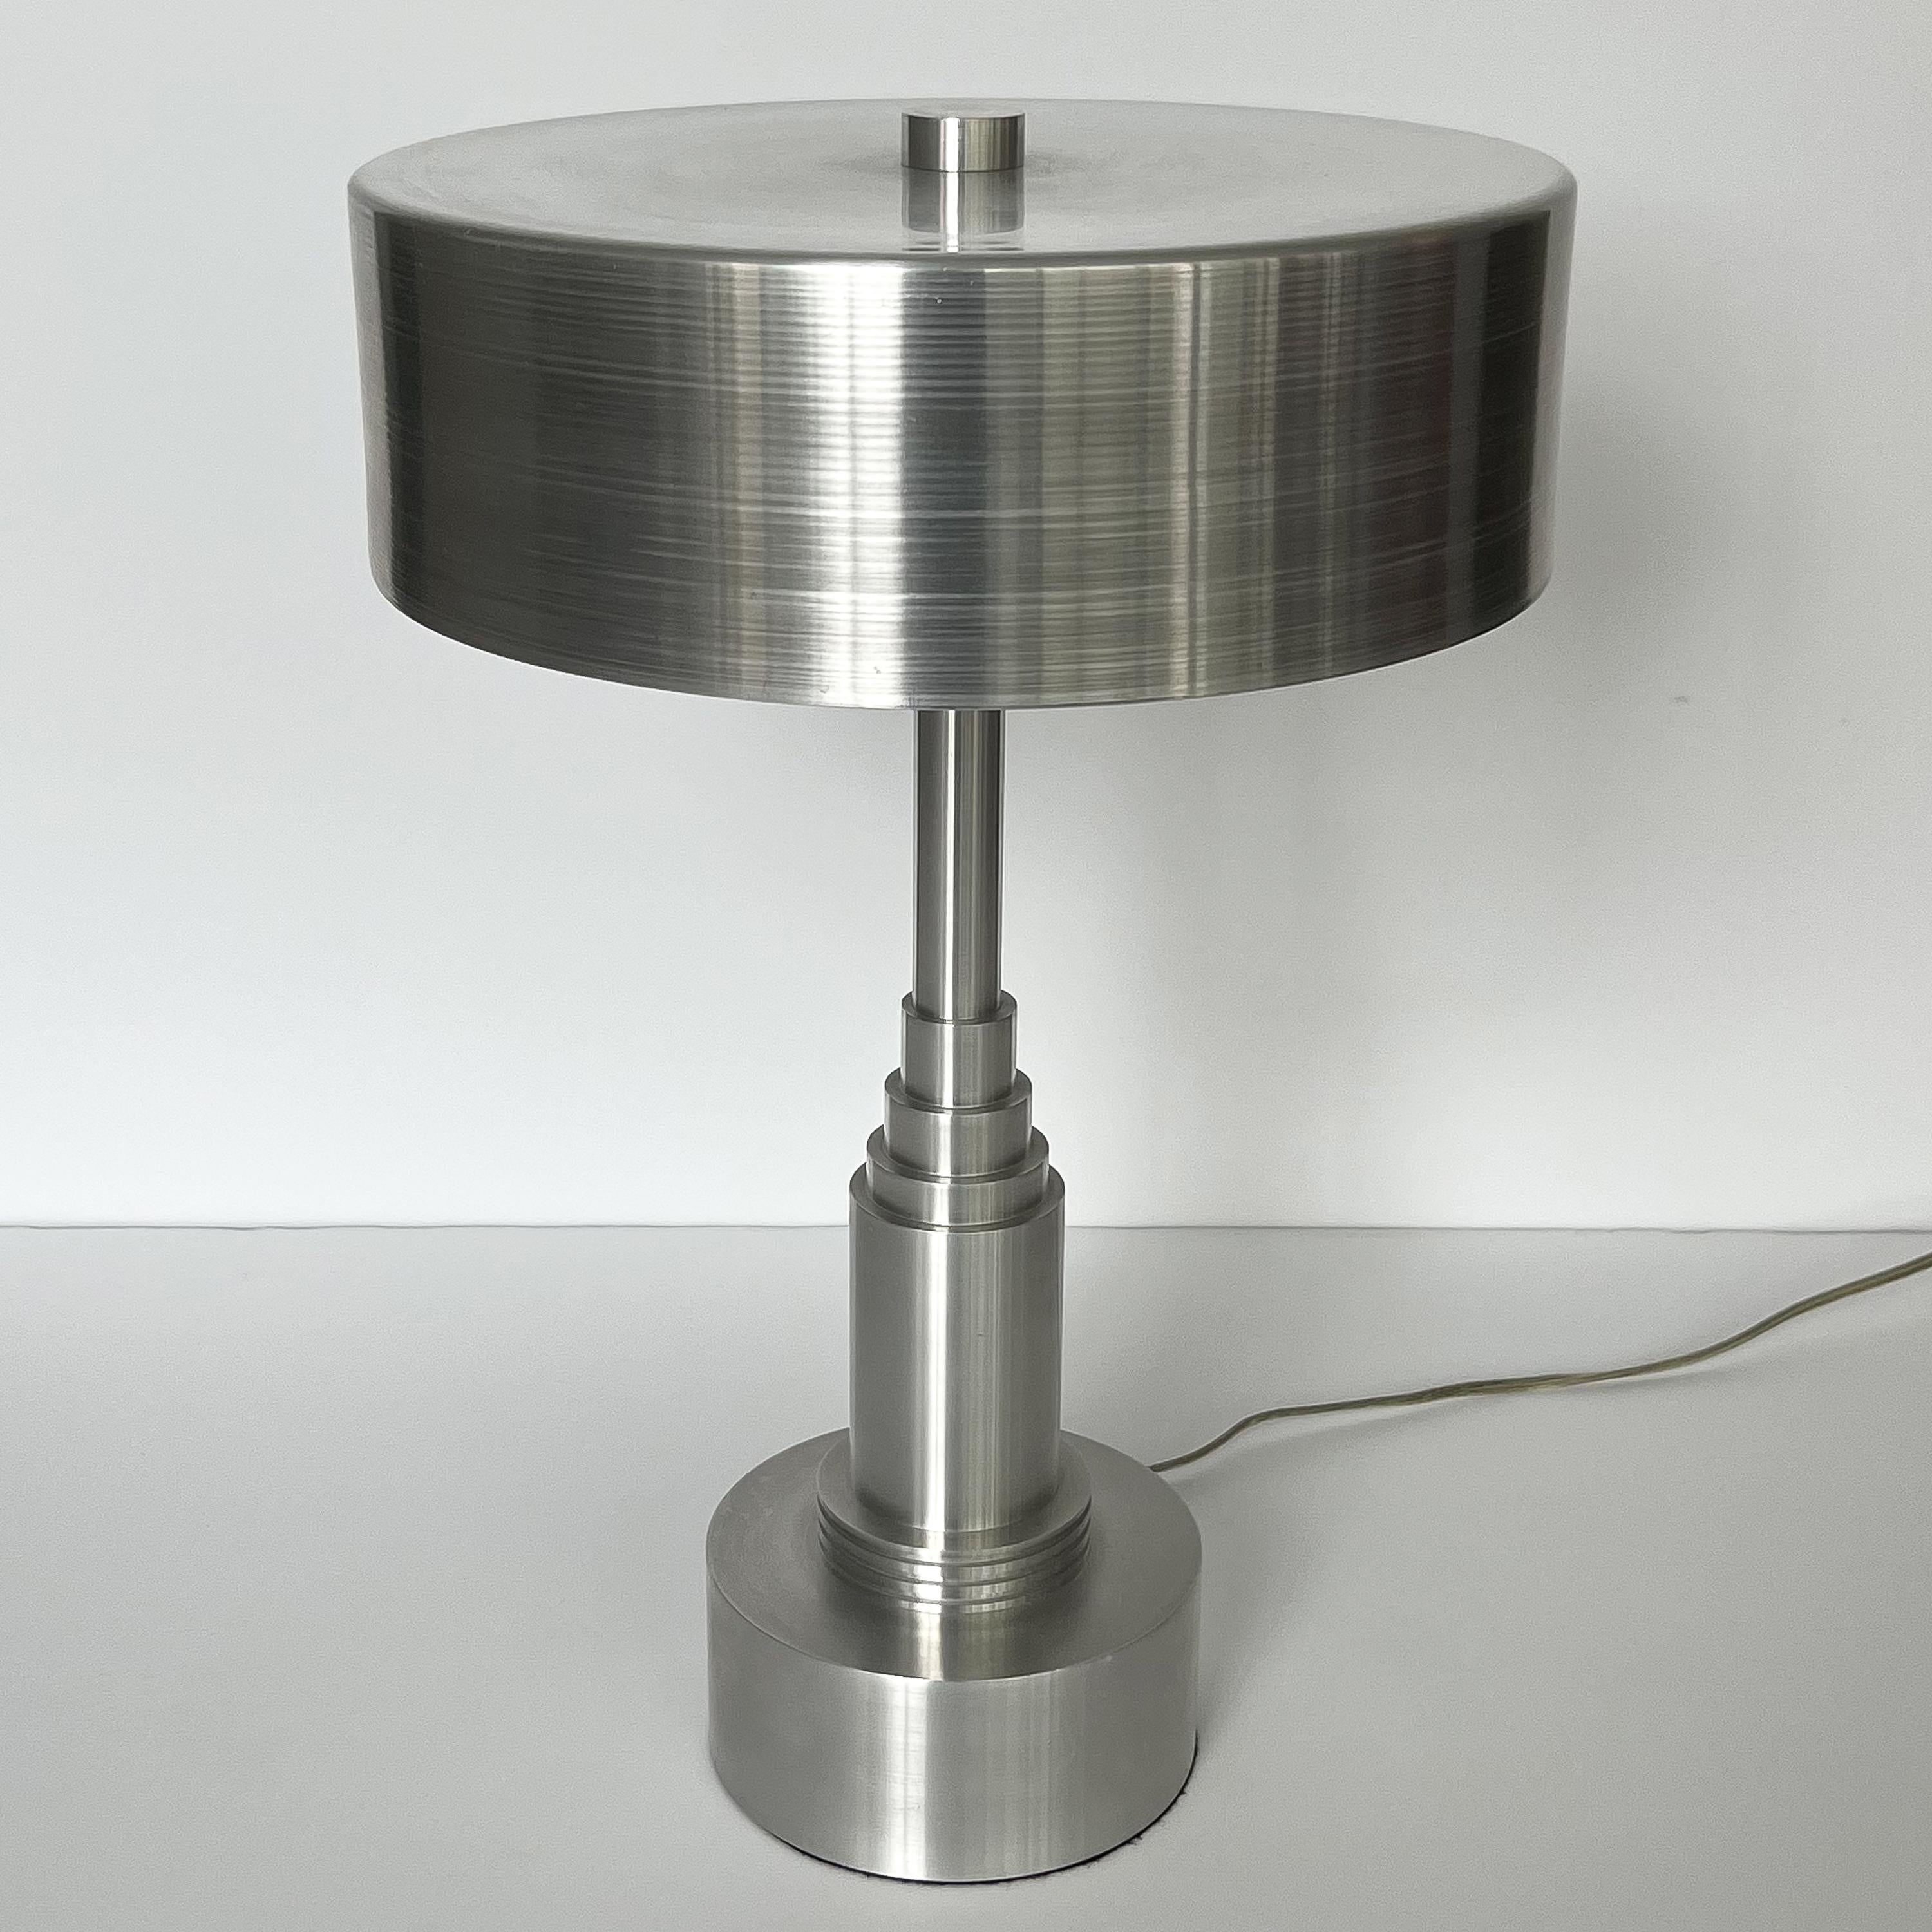 Aluminum Pair of Art Deco / Machine Age Table Lamps in the Manner of Walter Von Nessen